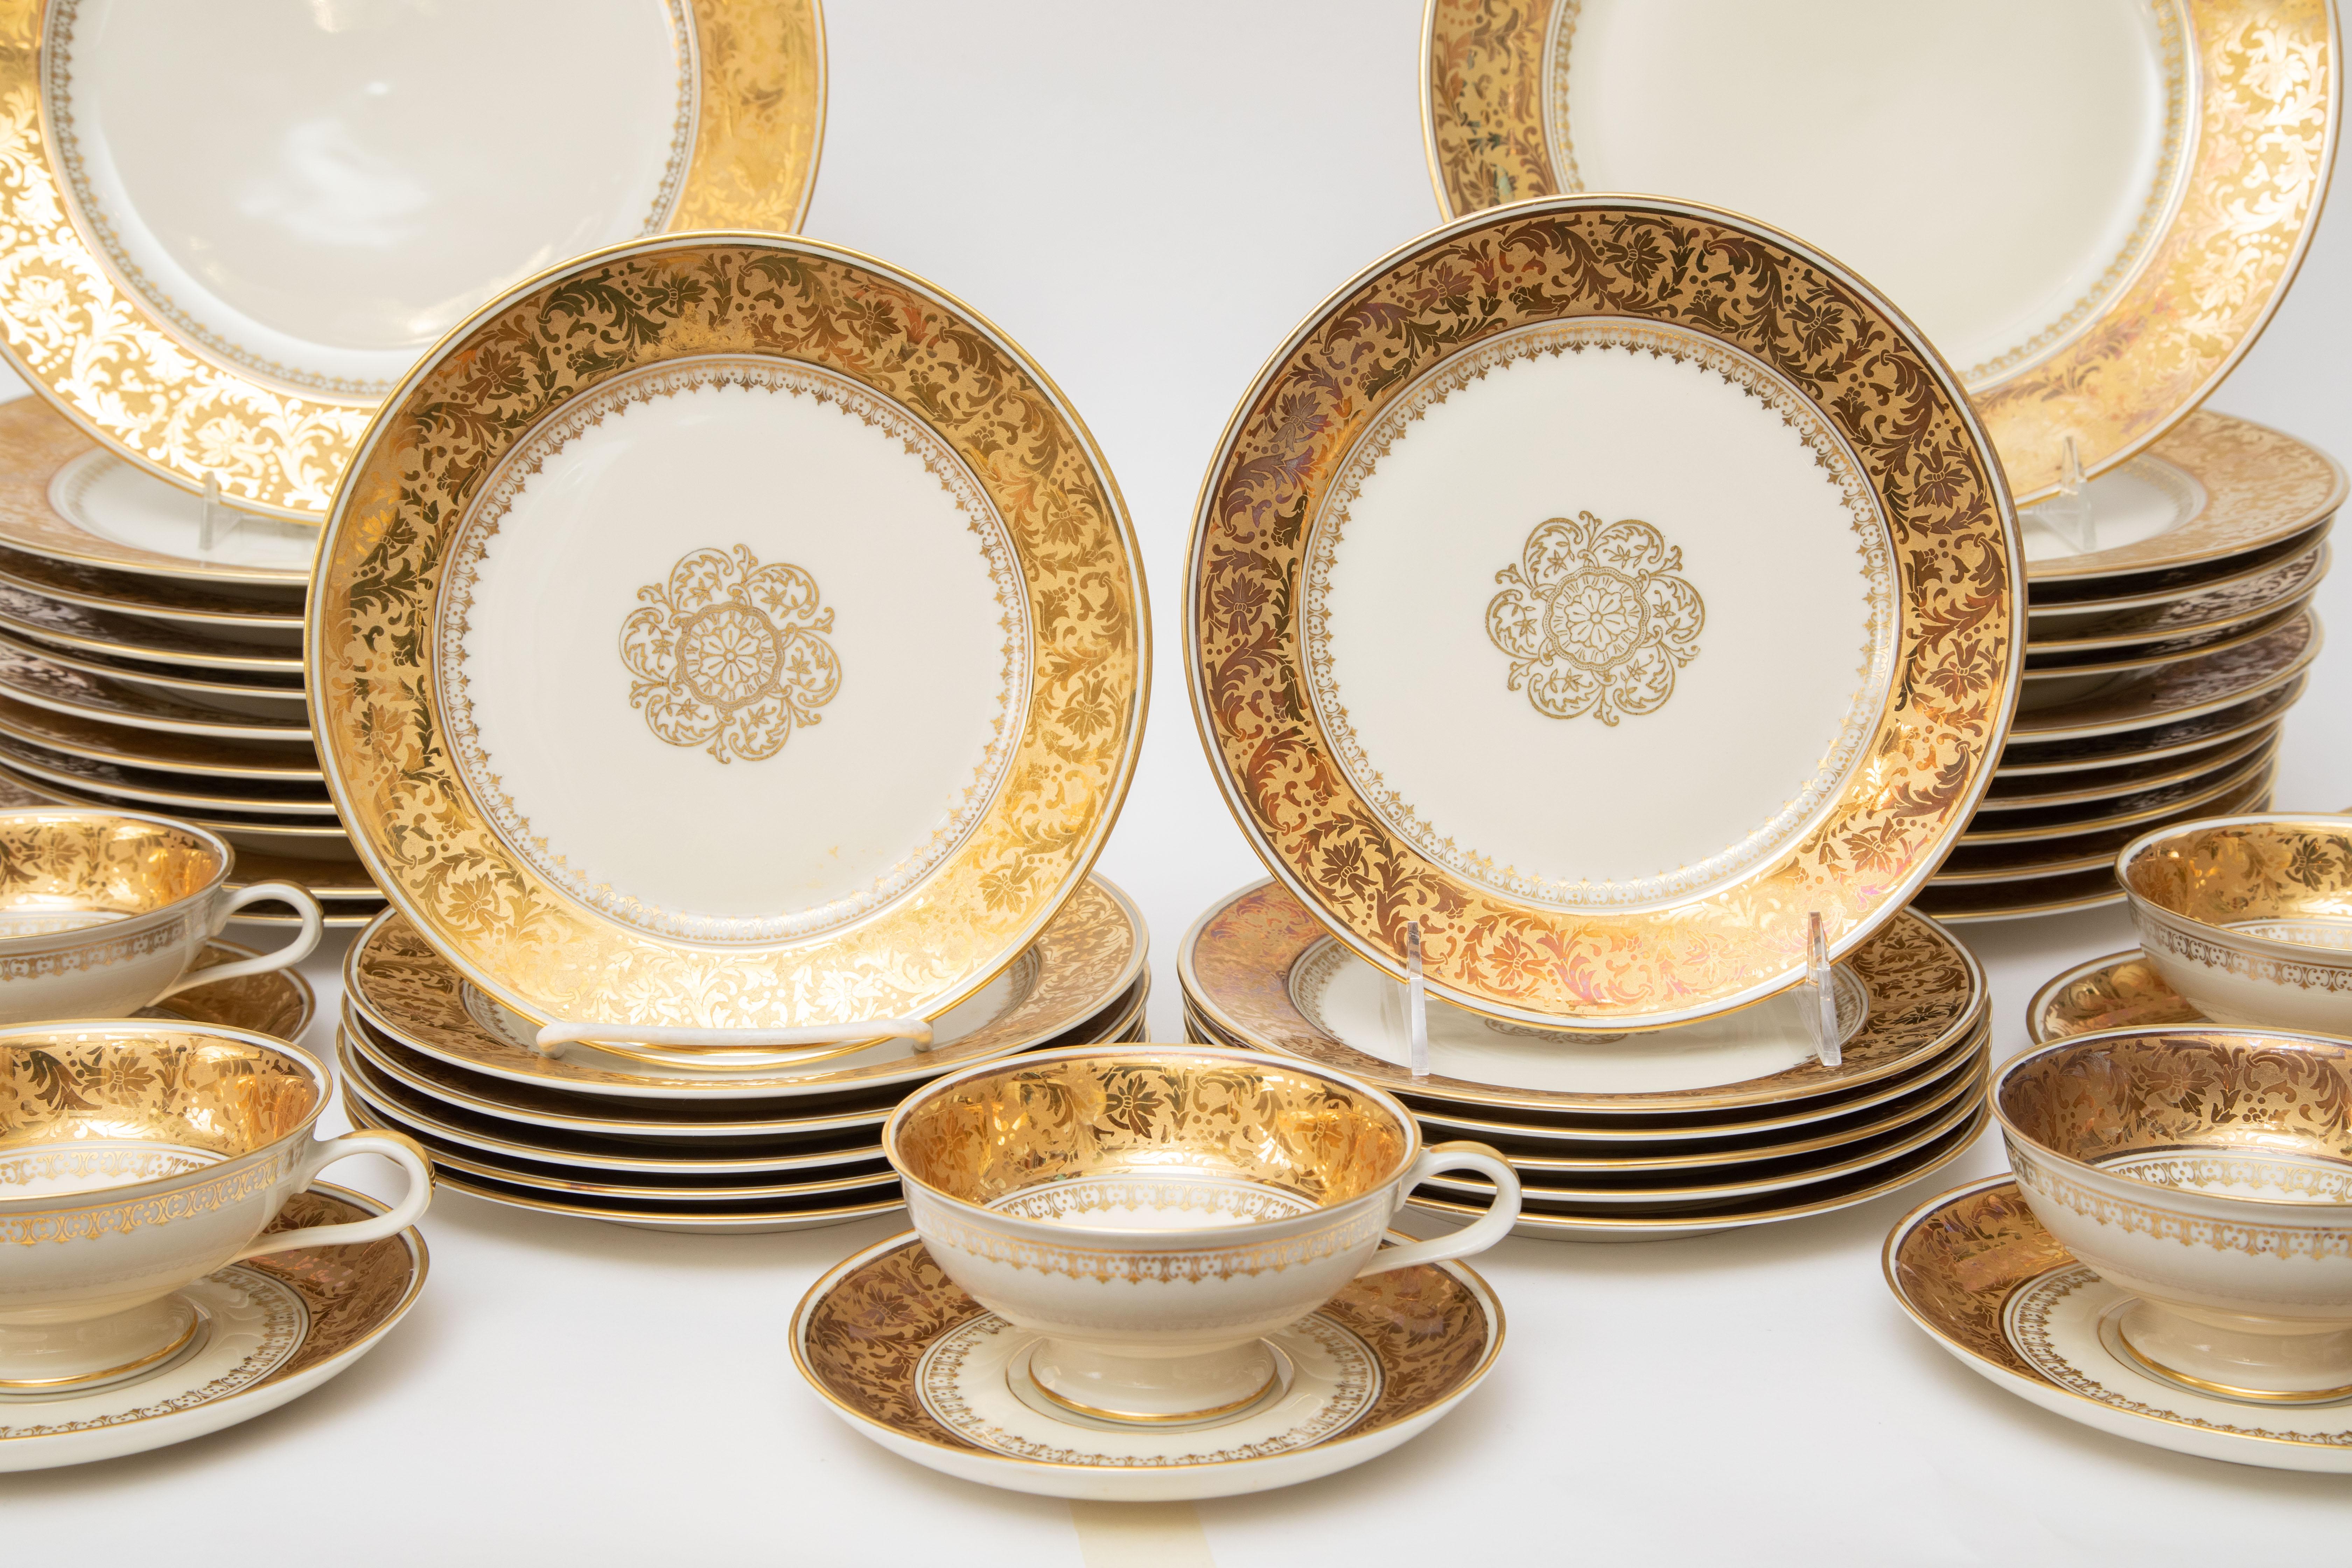 antique china set with gold trim